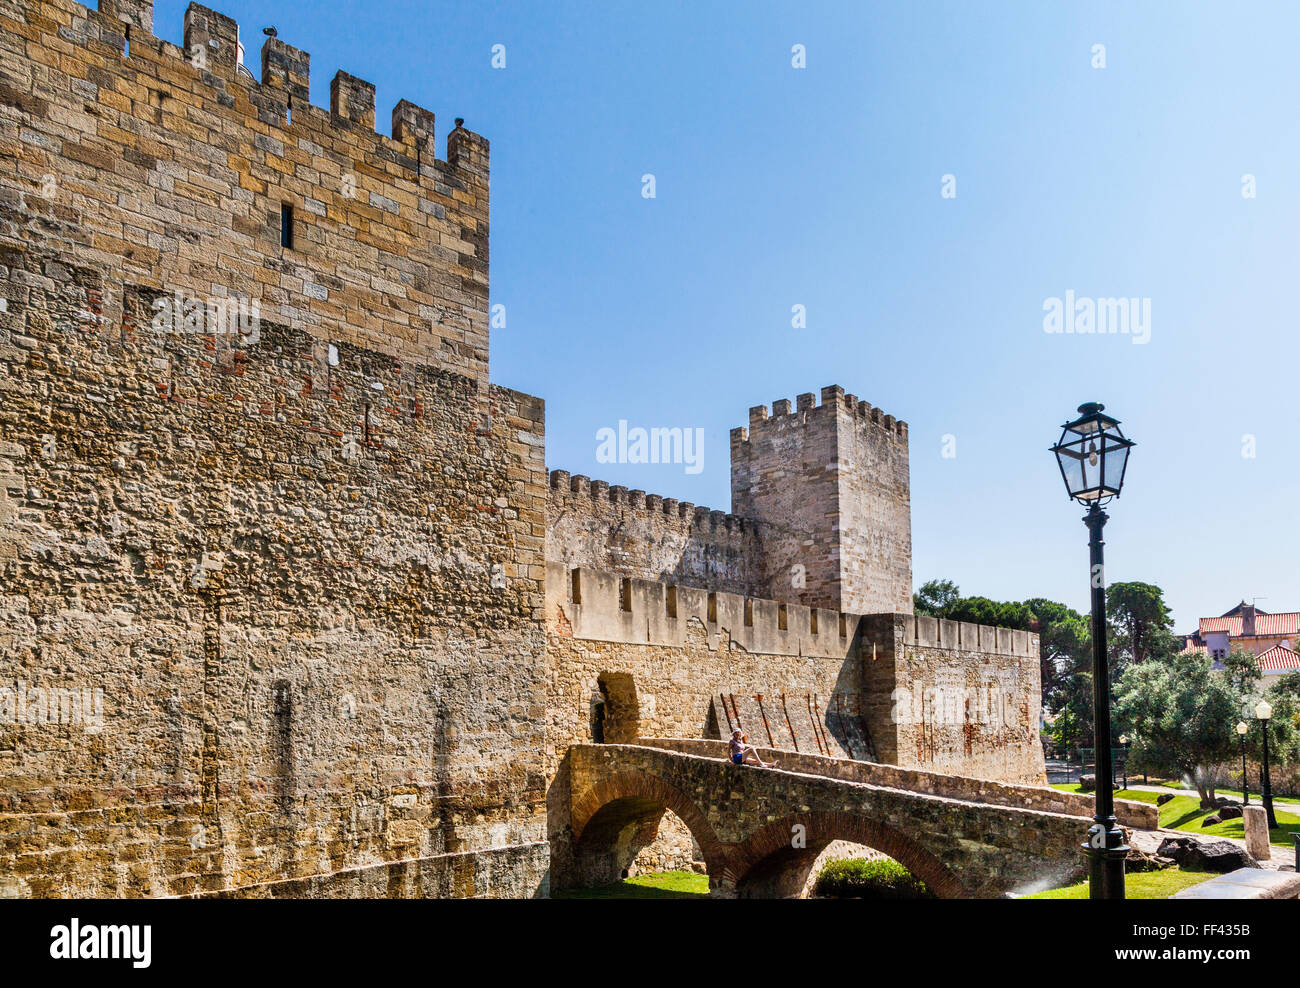 Portugal, Lisbon, the fortified central keep of Castelo de Sao Jorge, St. George's Castle Stock Photo